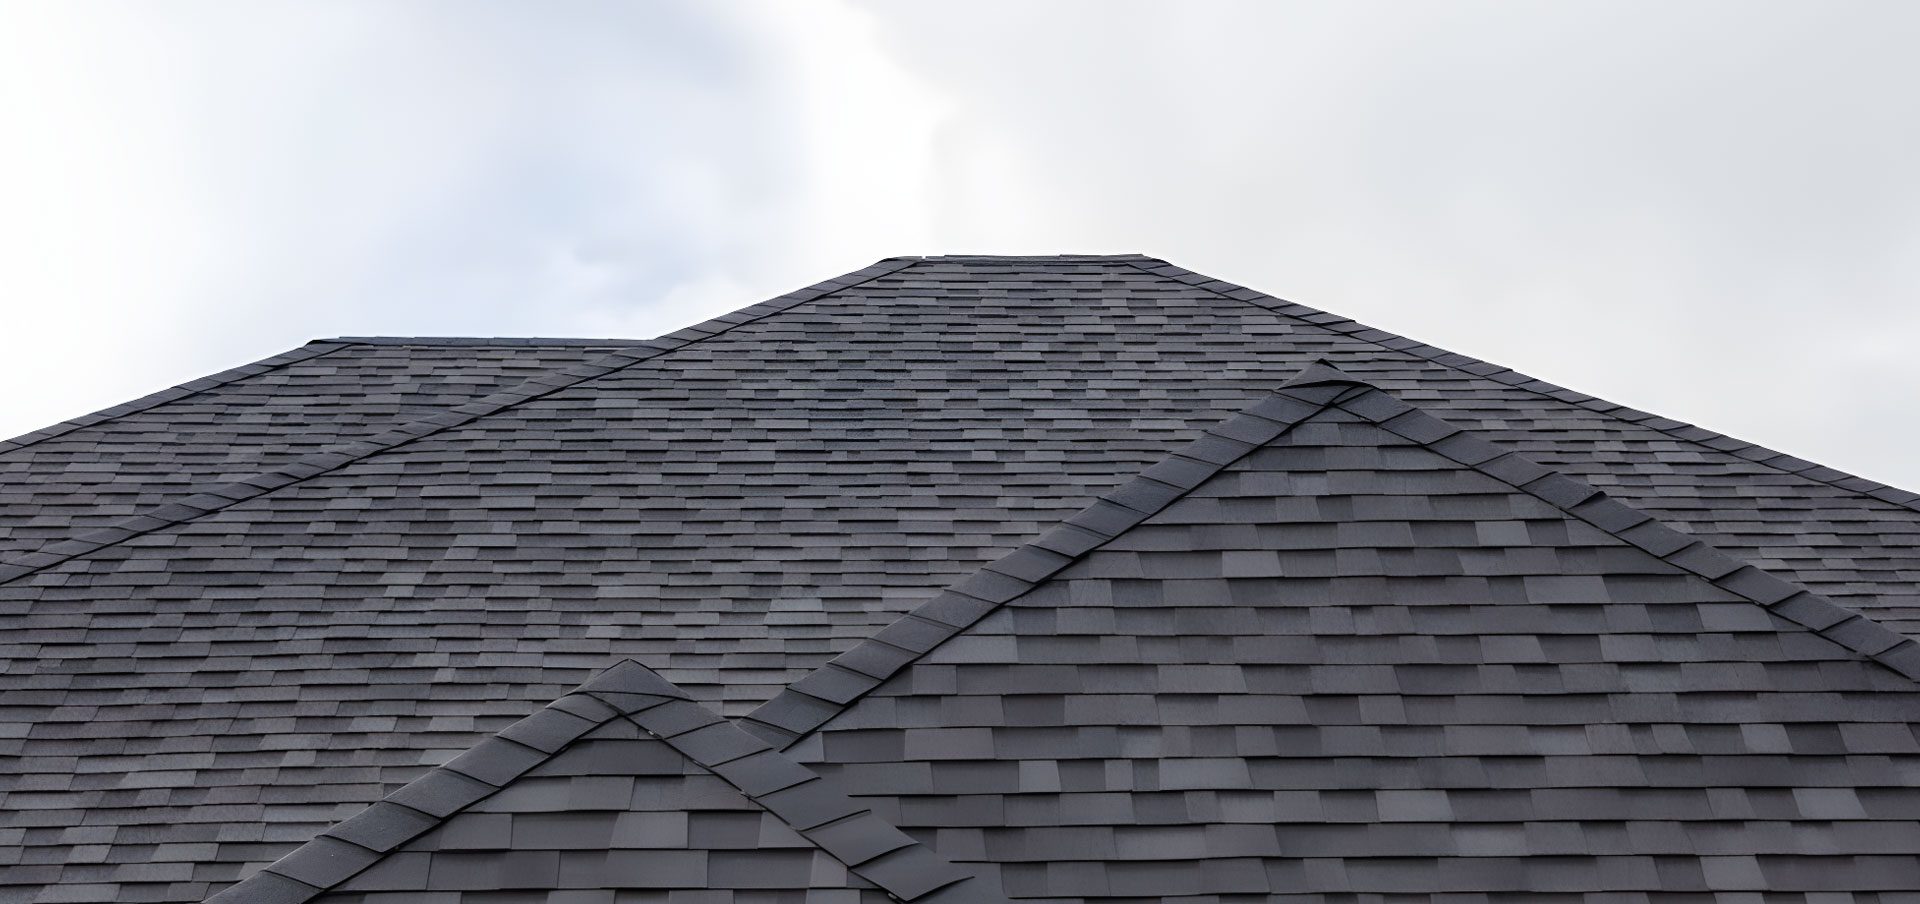 A close up of the roof of a house